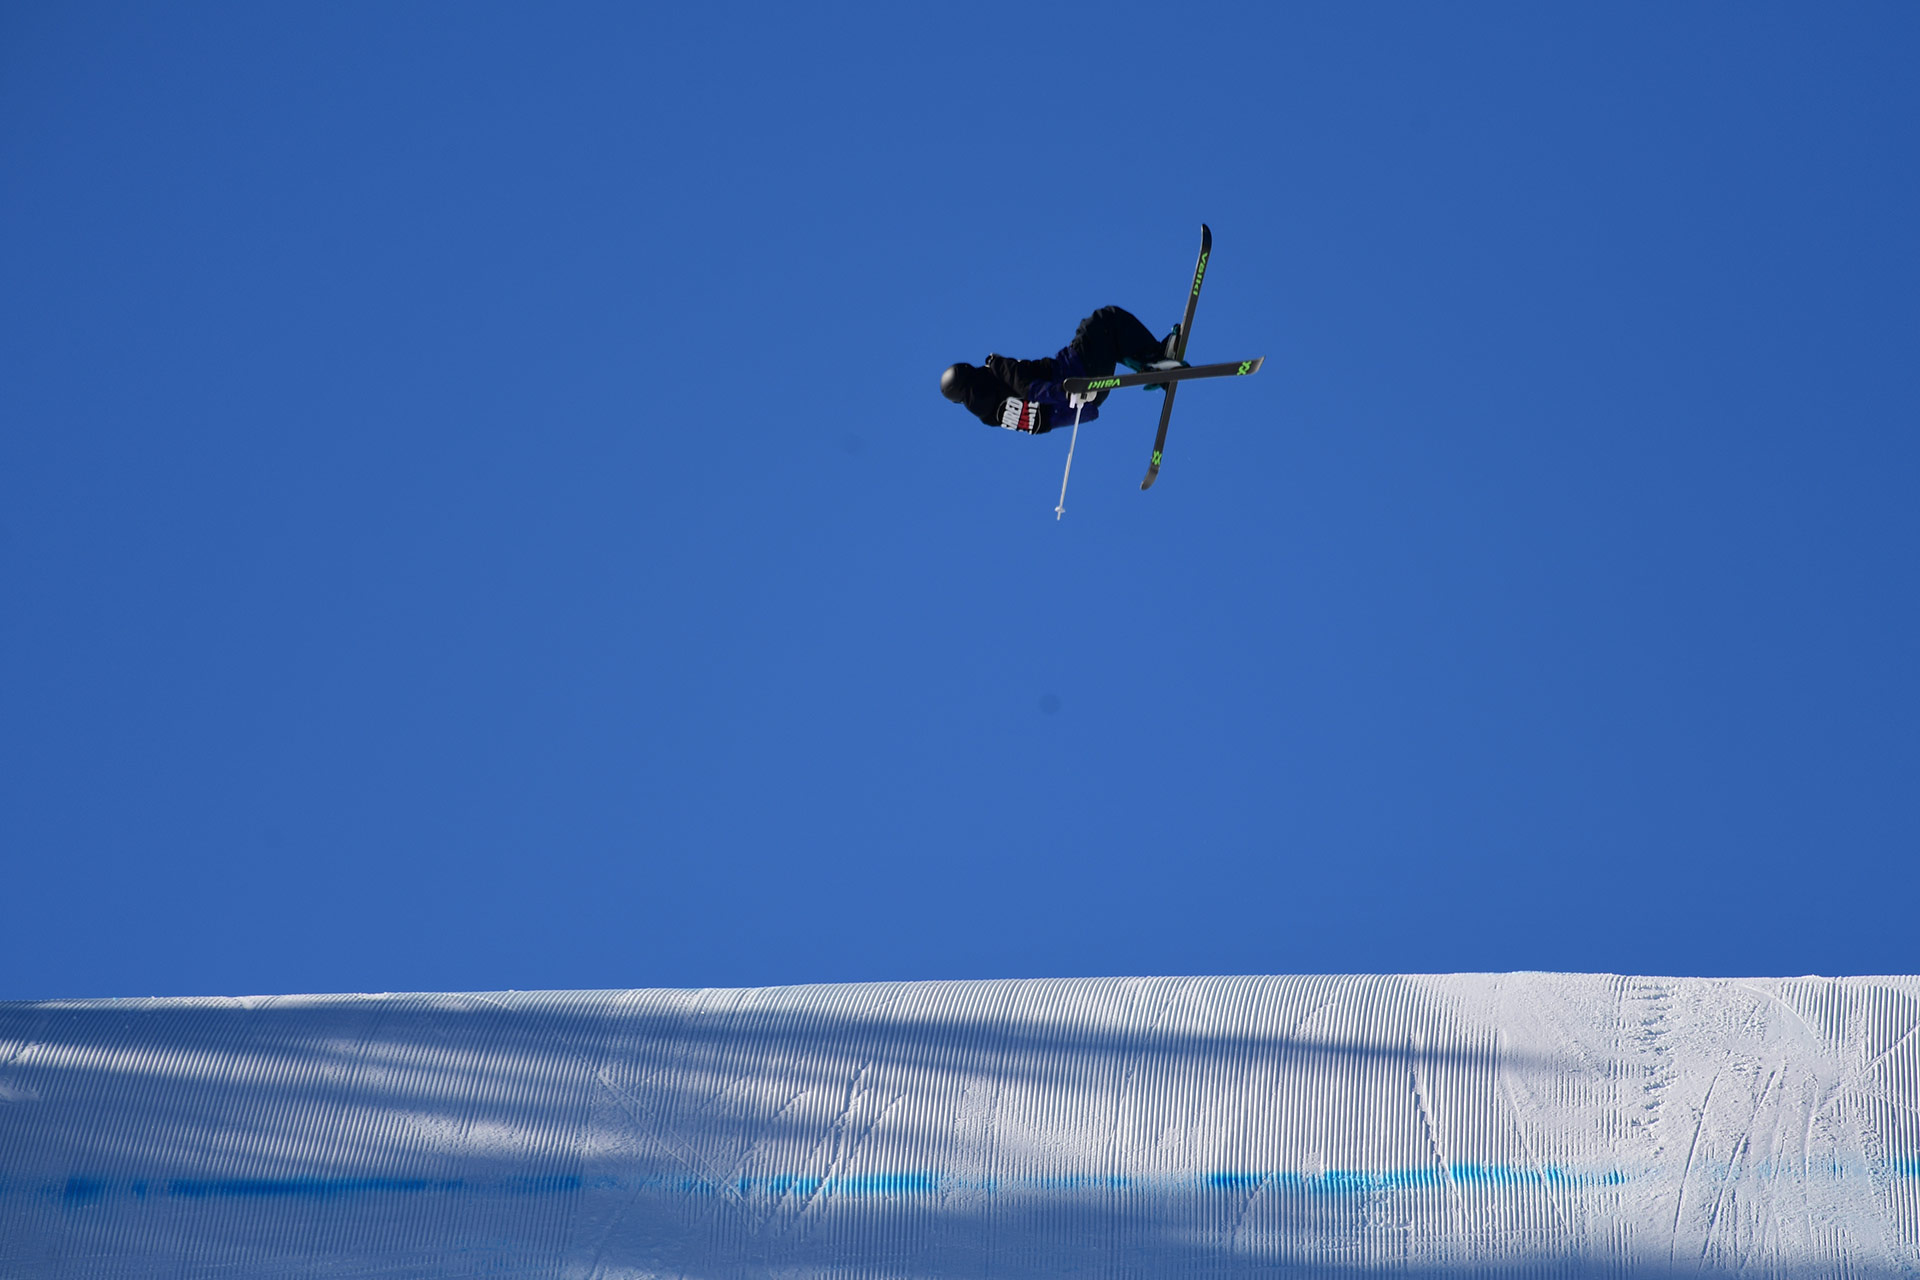 Kirsty Muir competes in slopestyle at the 2022 Winter X Games